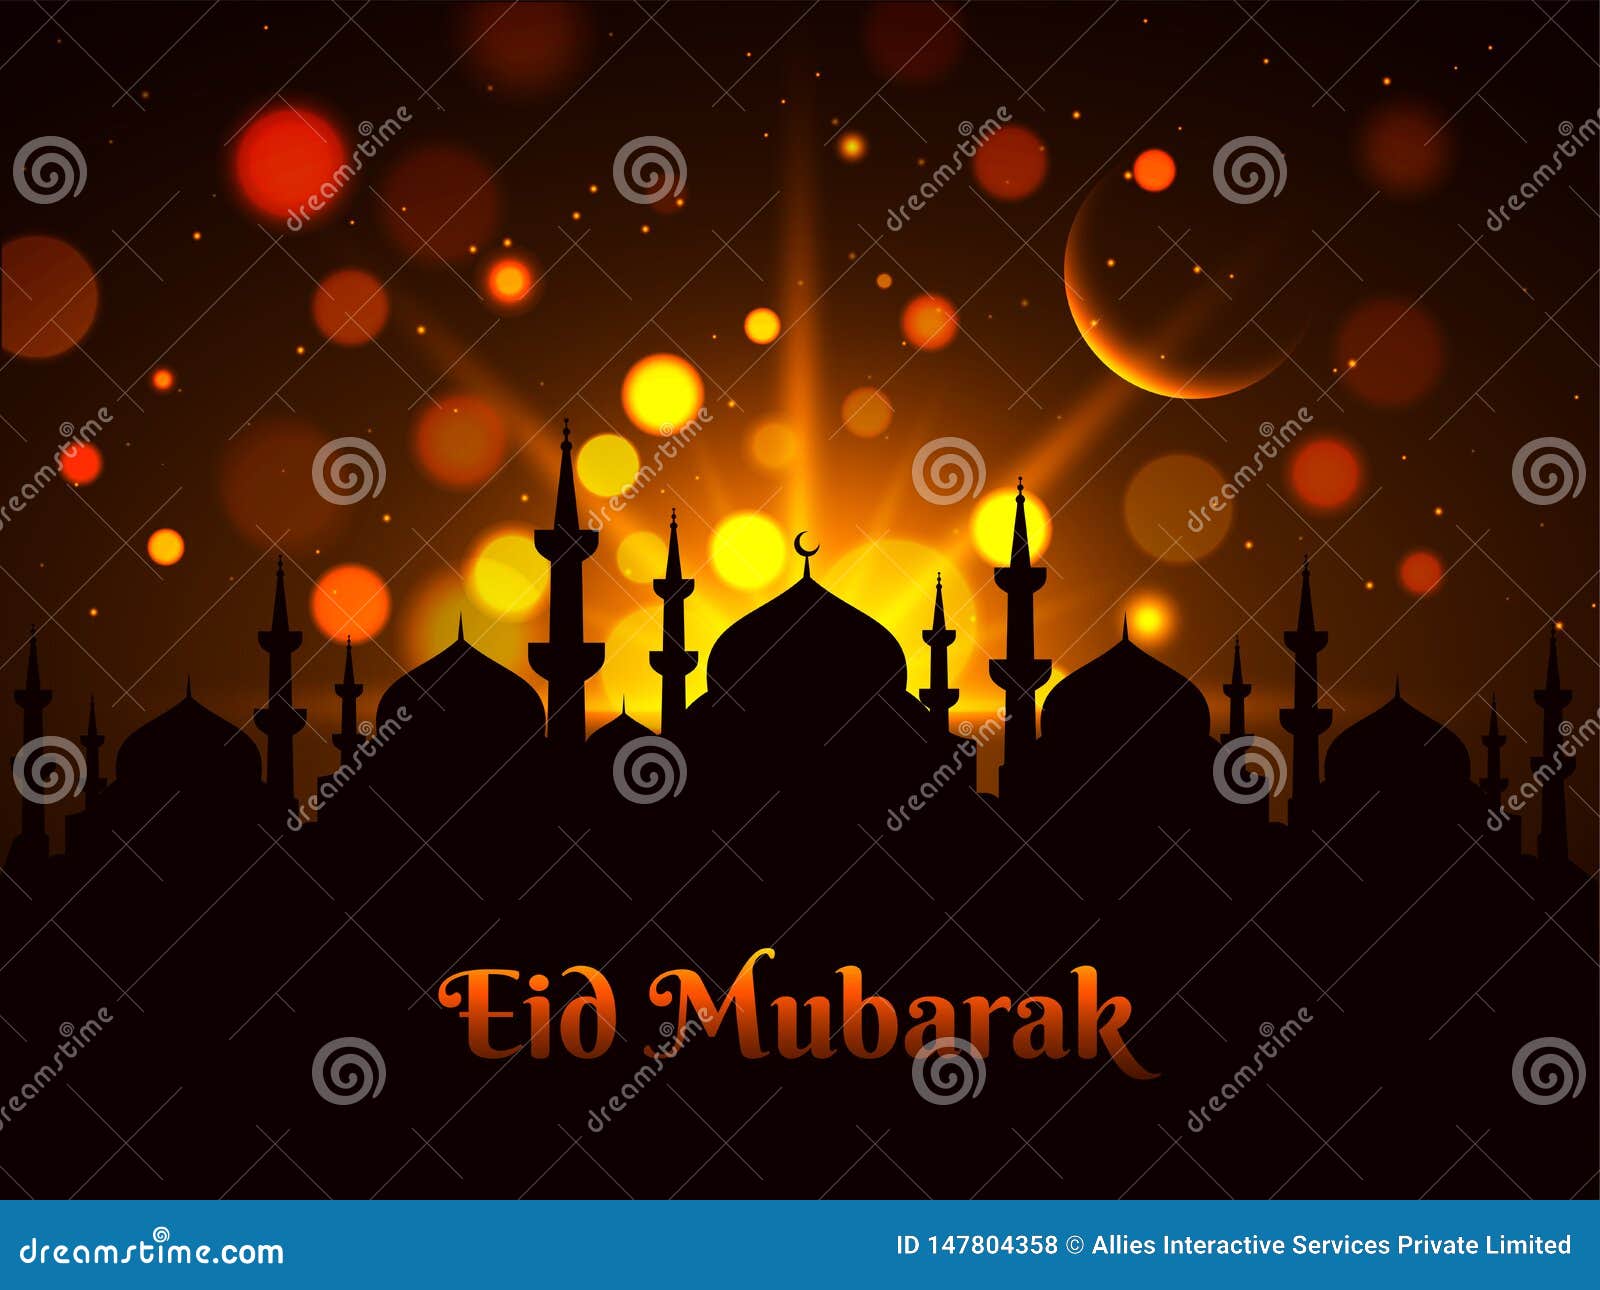 Eid Mubarak Background with Illustration of Mosque Masjid and Moon for  Header Banner. Stock Illustration - Illustration of background, glow:  147804358